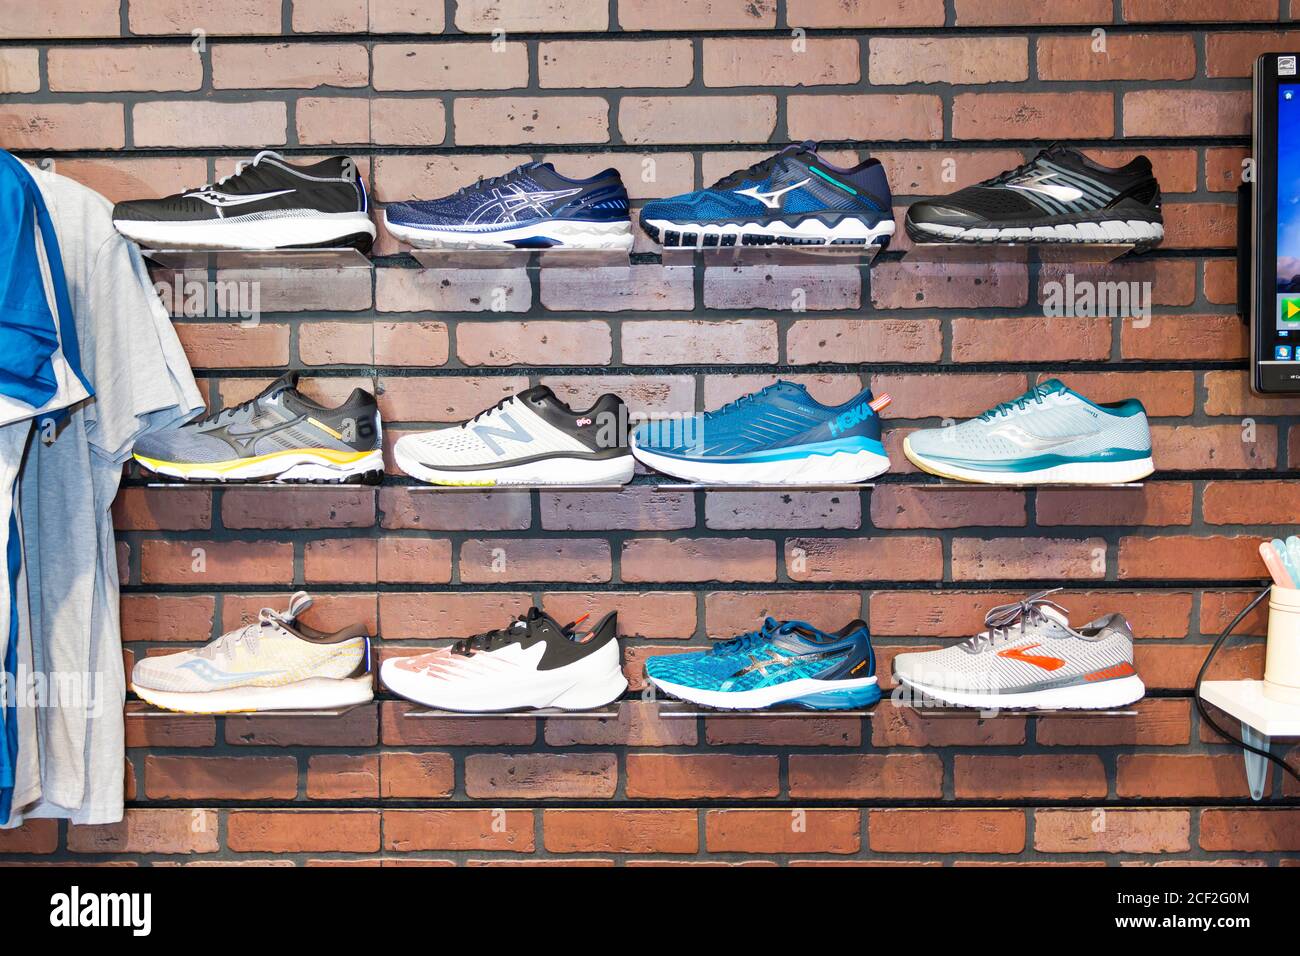 Smithtown, New York, USA - 28 August 2020: Running shoes are against the wall on display at a running shoe specialty store. Stock Photo